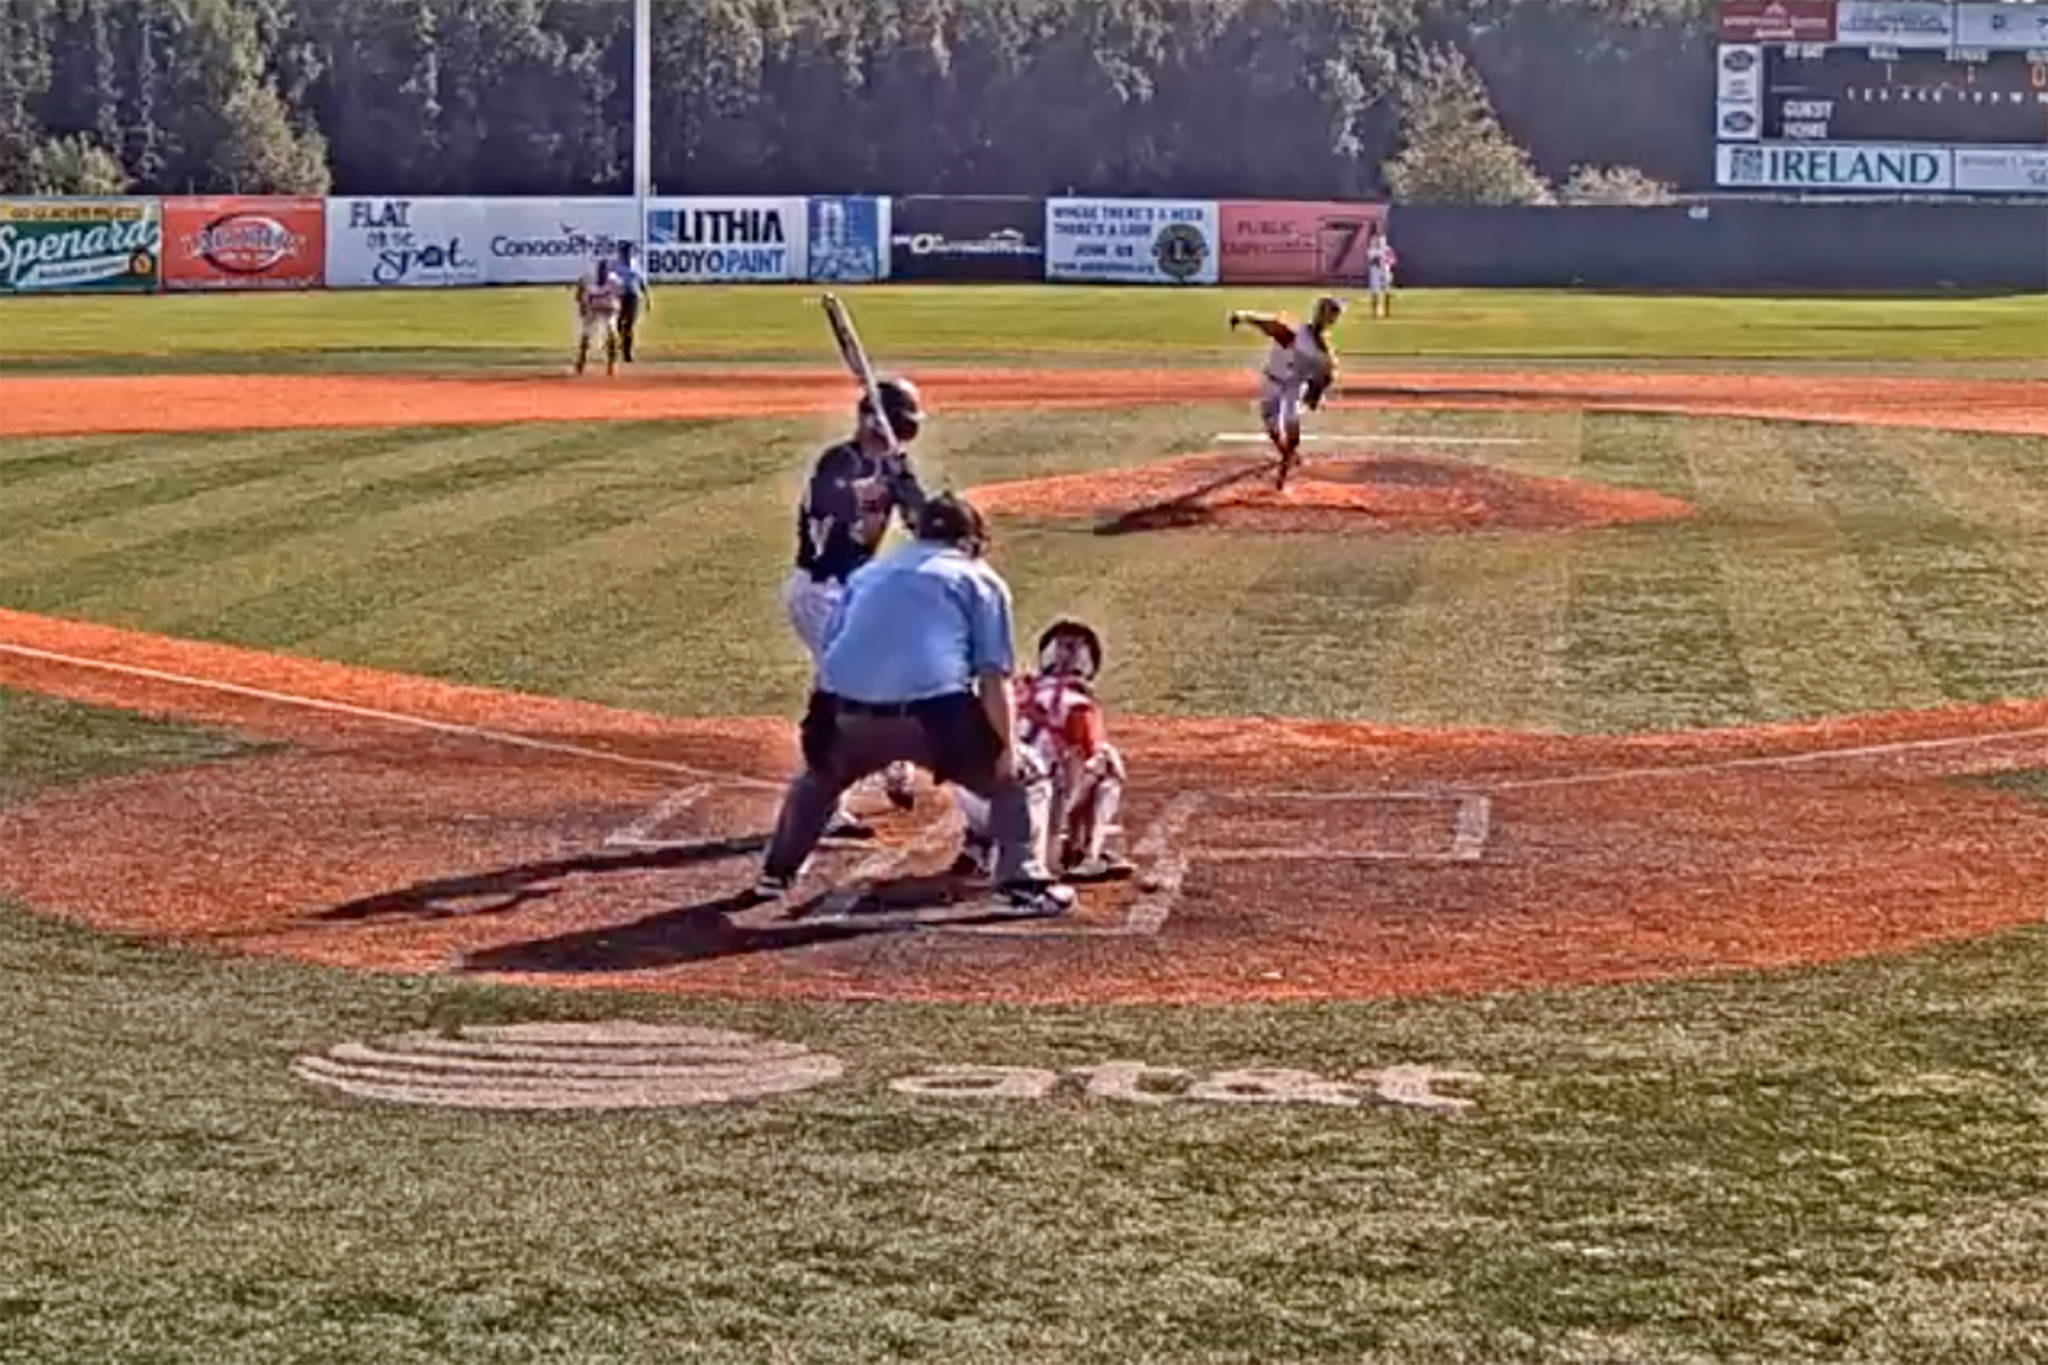 Juneau Post 25’s Gabe Storie bats in the first inning against Wasilla Post 35’s Carson Boyett at the Alaska Legion state tournament at Mulcahy Stadium in Anchorage on Monday, July 29, 2019. (Screenshot)